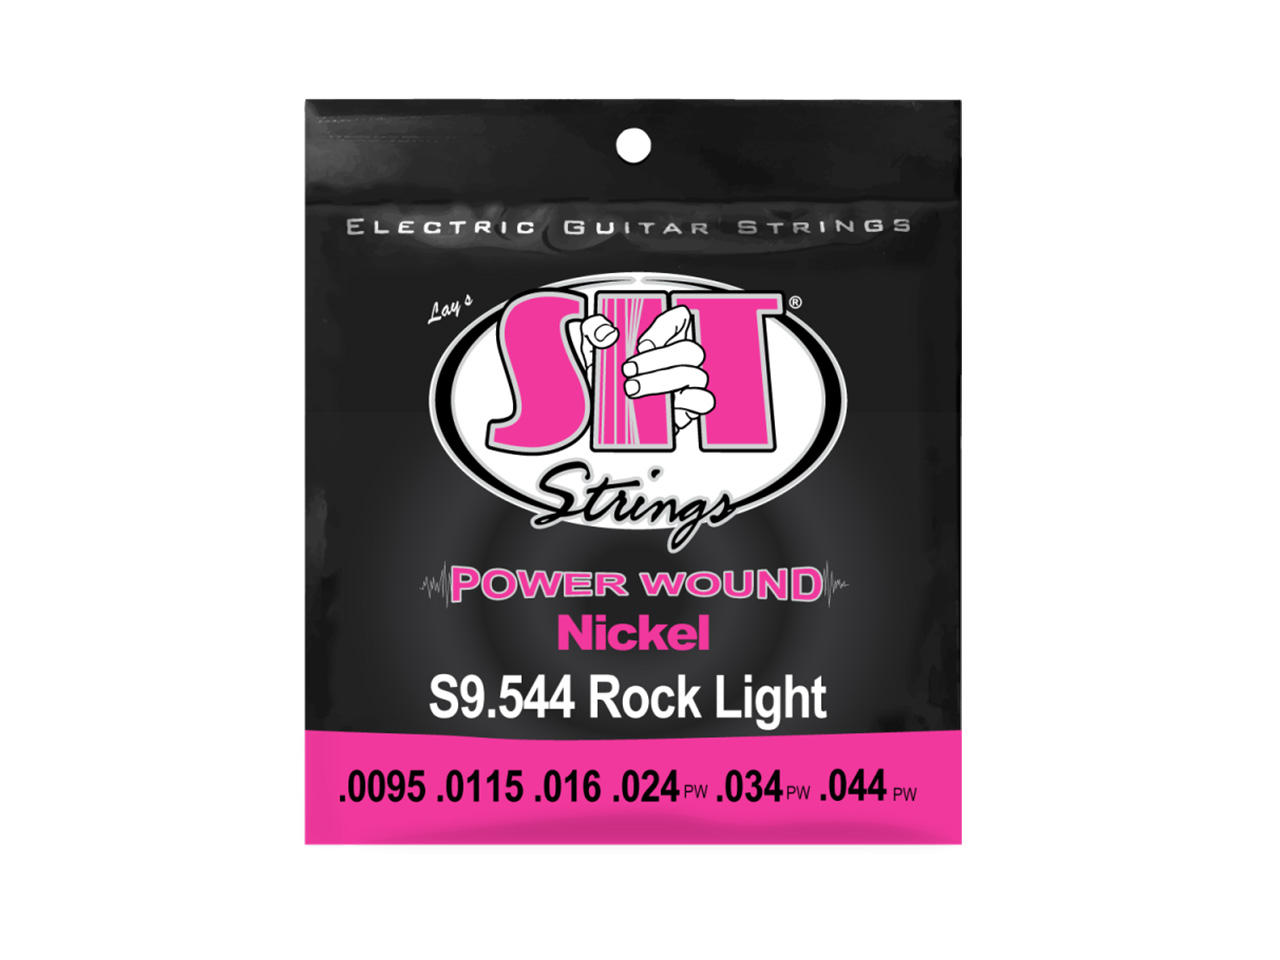 SIT(エスアイティー) POWER WOUND -Nickel Round Wound ROCK LIGHT/ S9.544 (エレキギター弦)